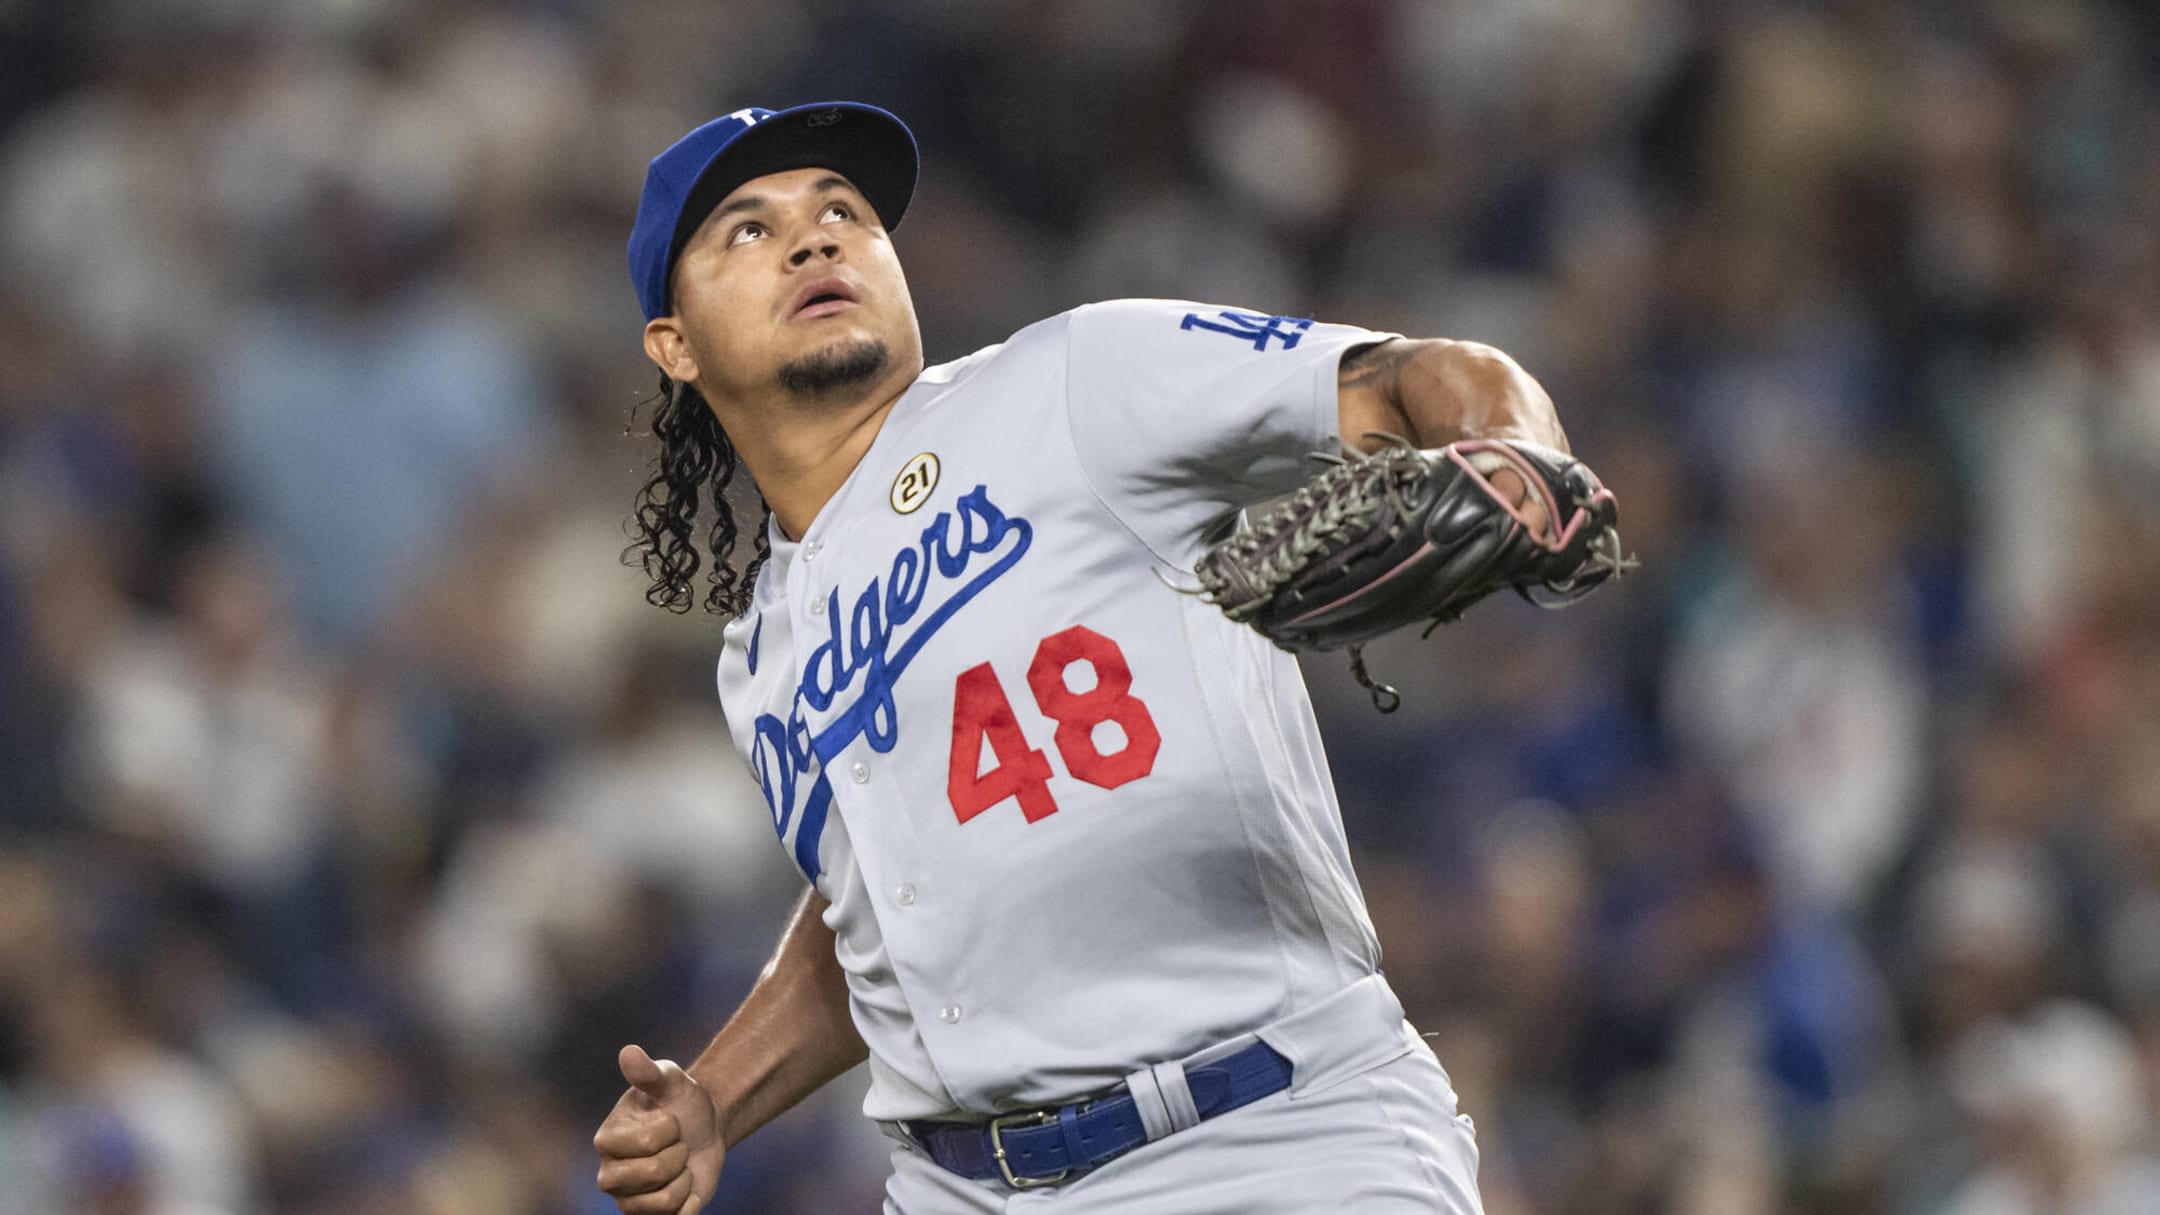 Brusdar Graterol reunites with mom, helps pitch Dodgers to win